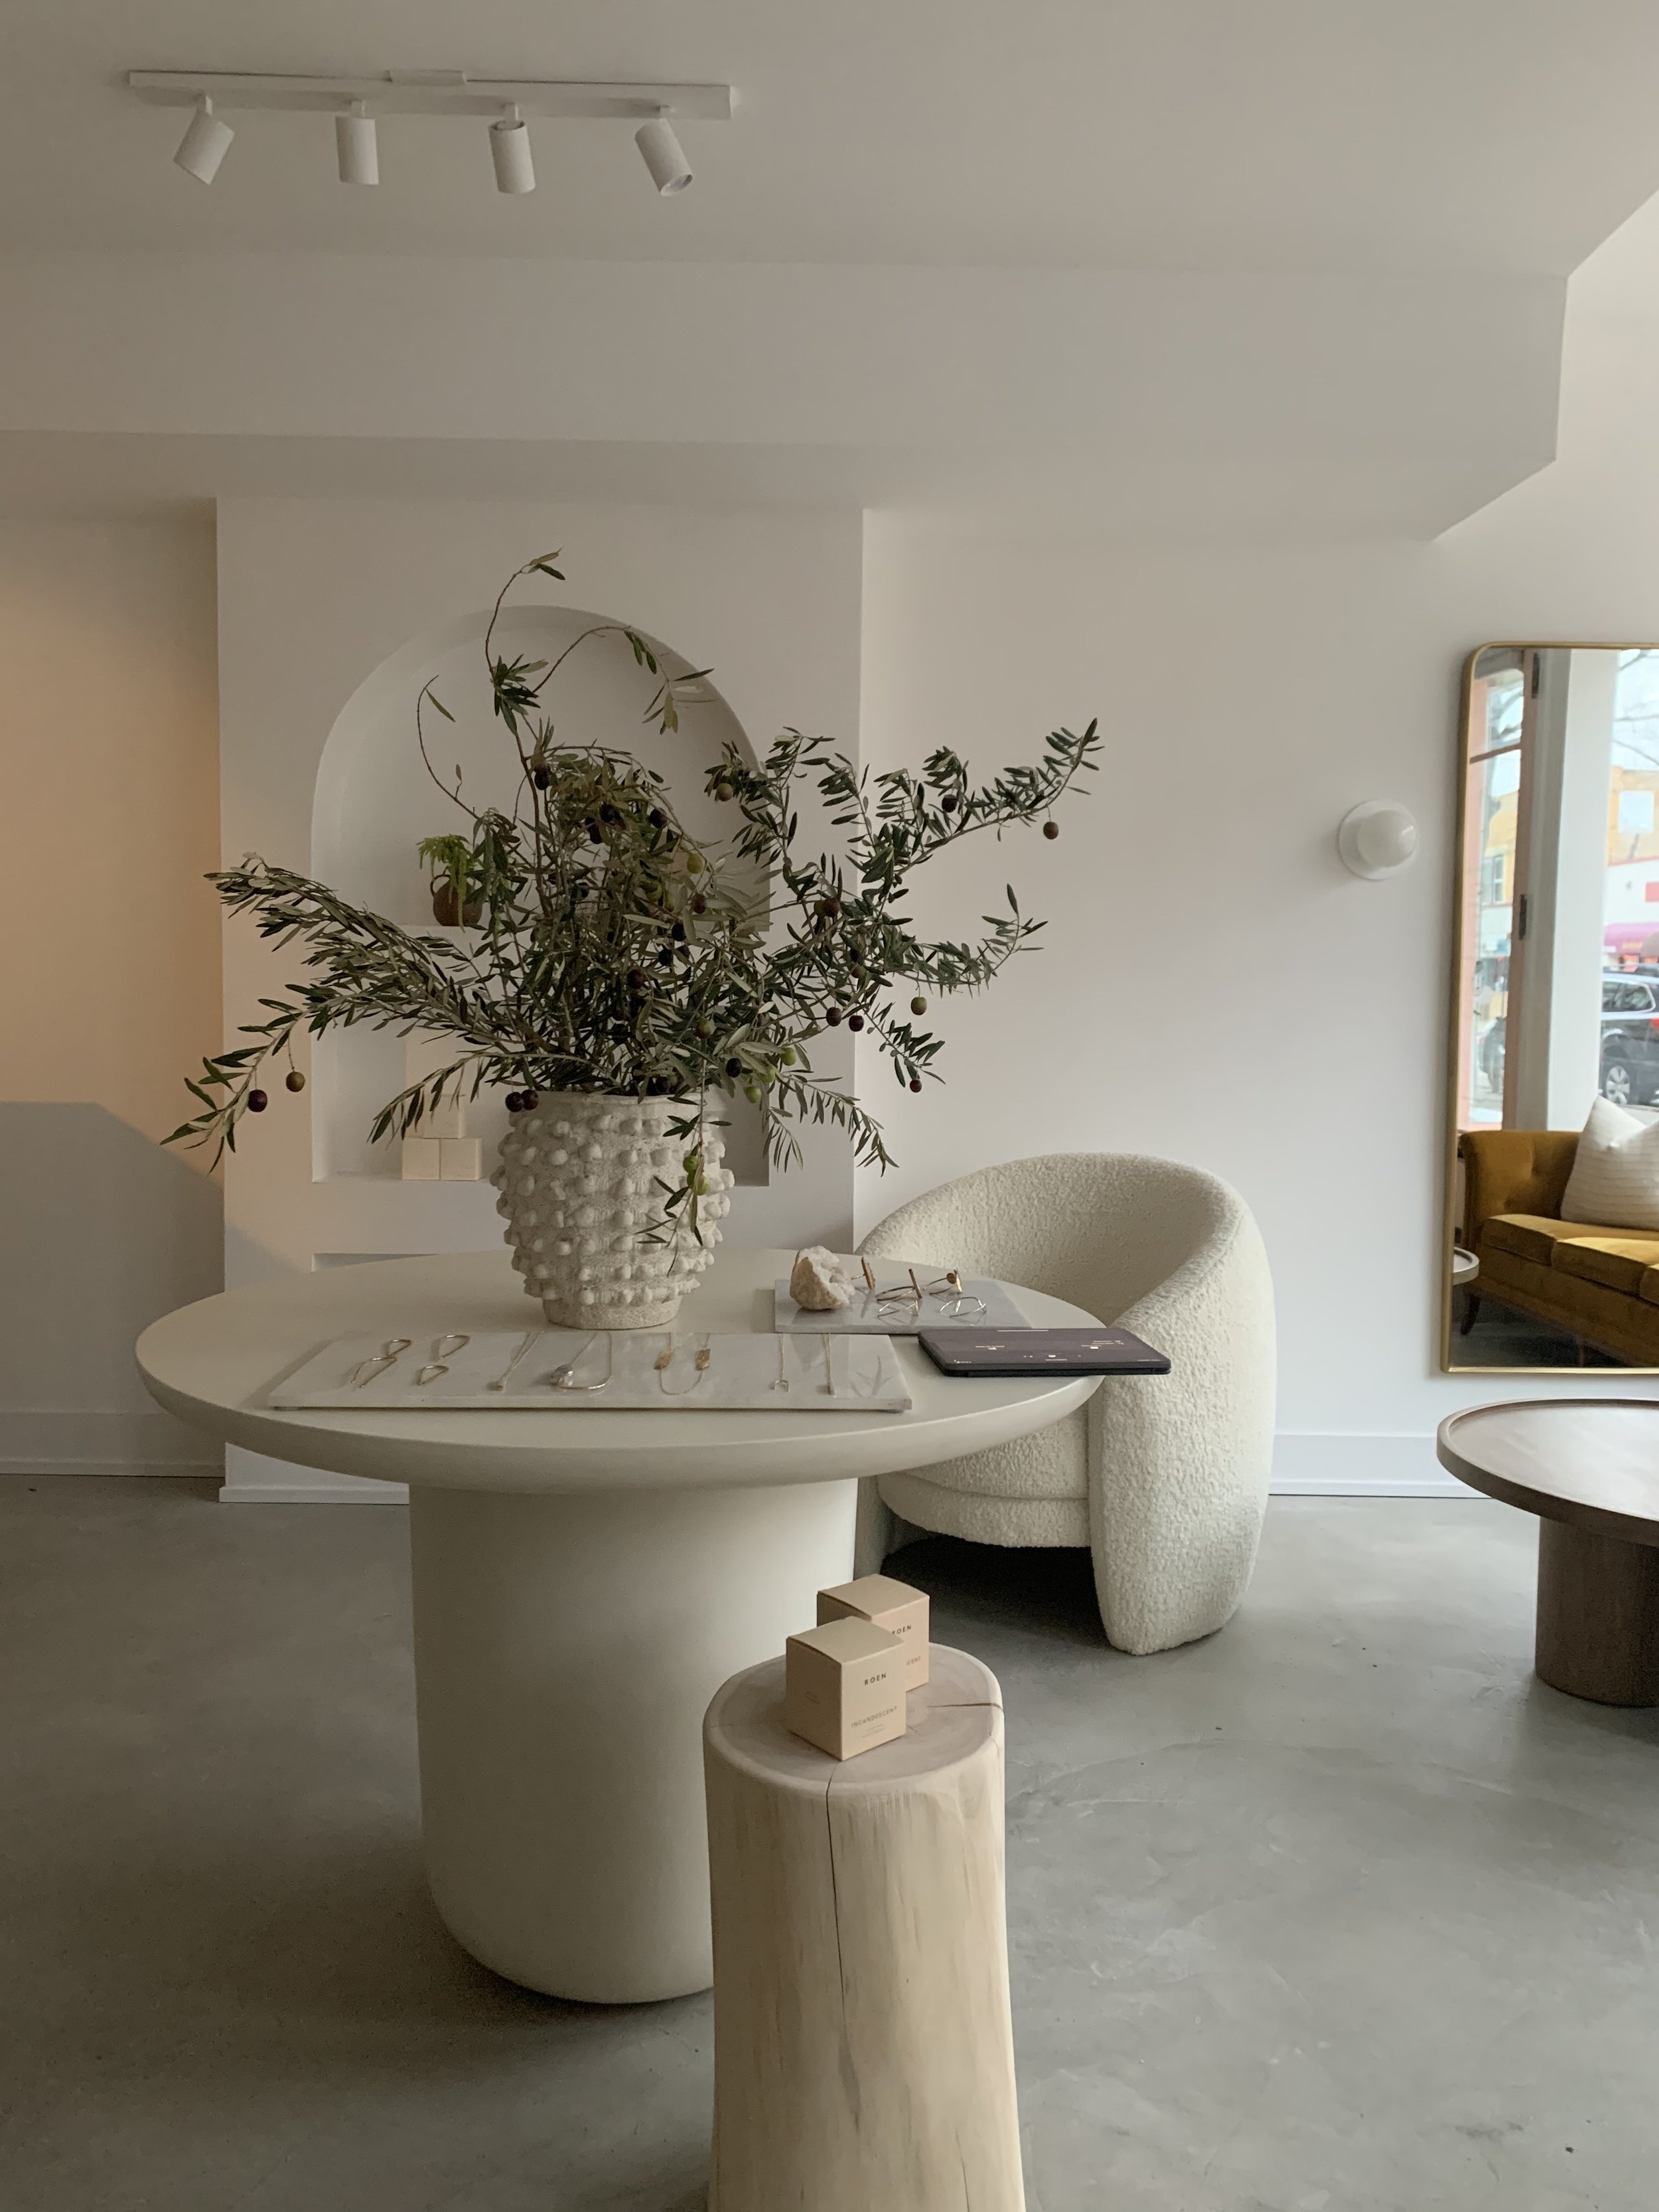  Floral Styling for Mineralogy   Interior Design and Image: Solstice Interiors 